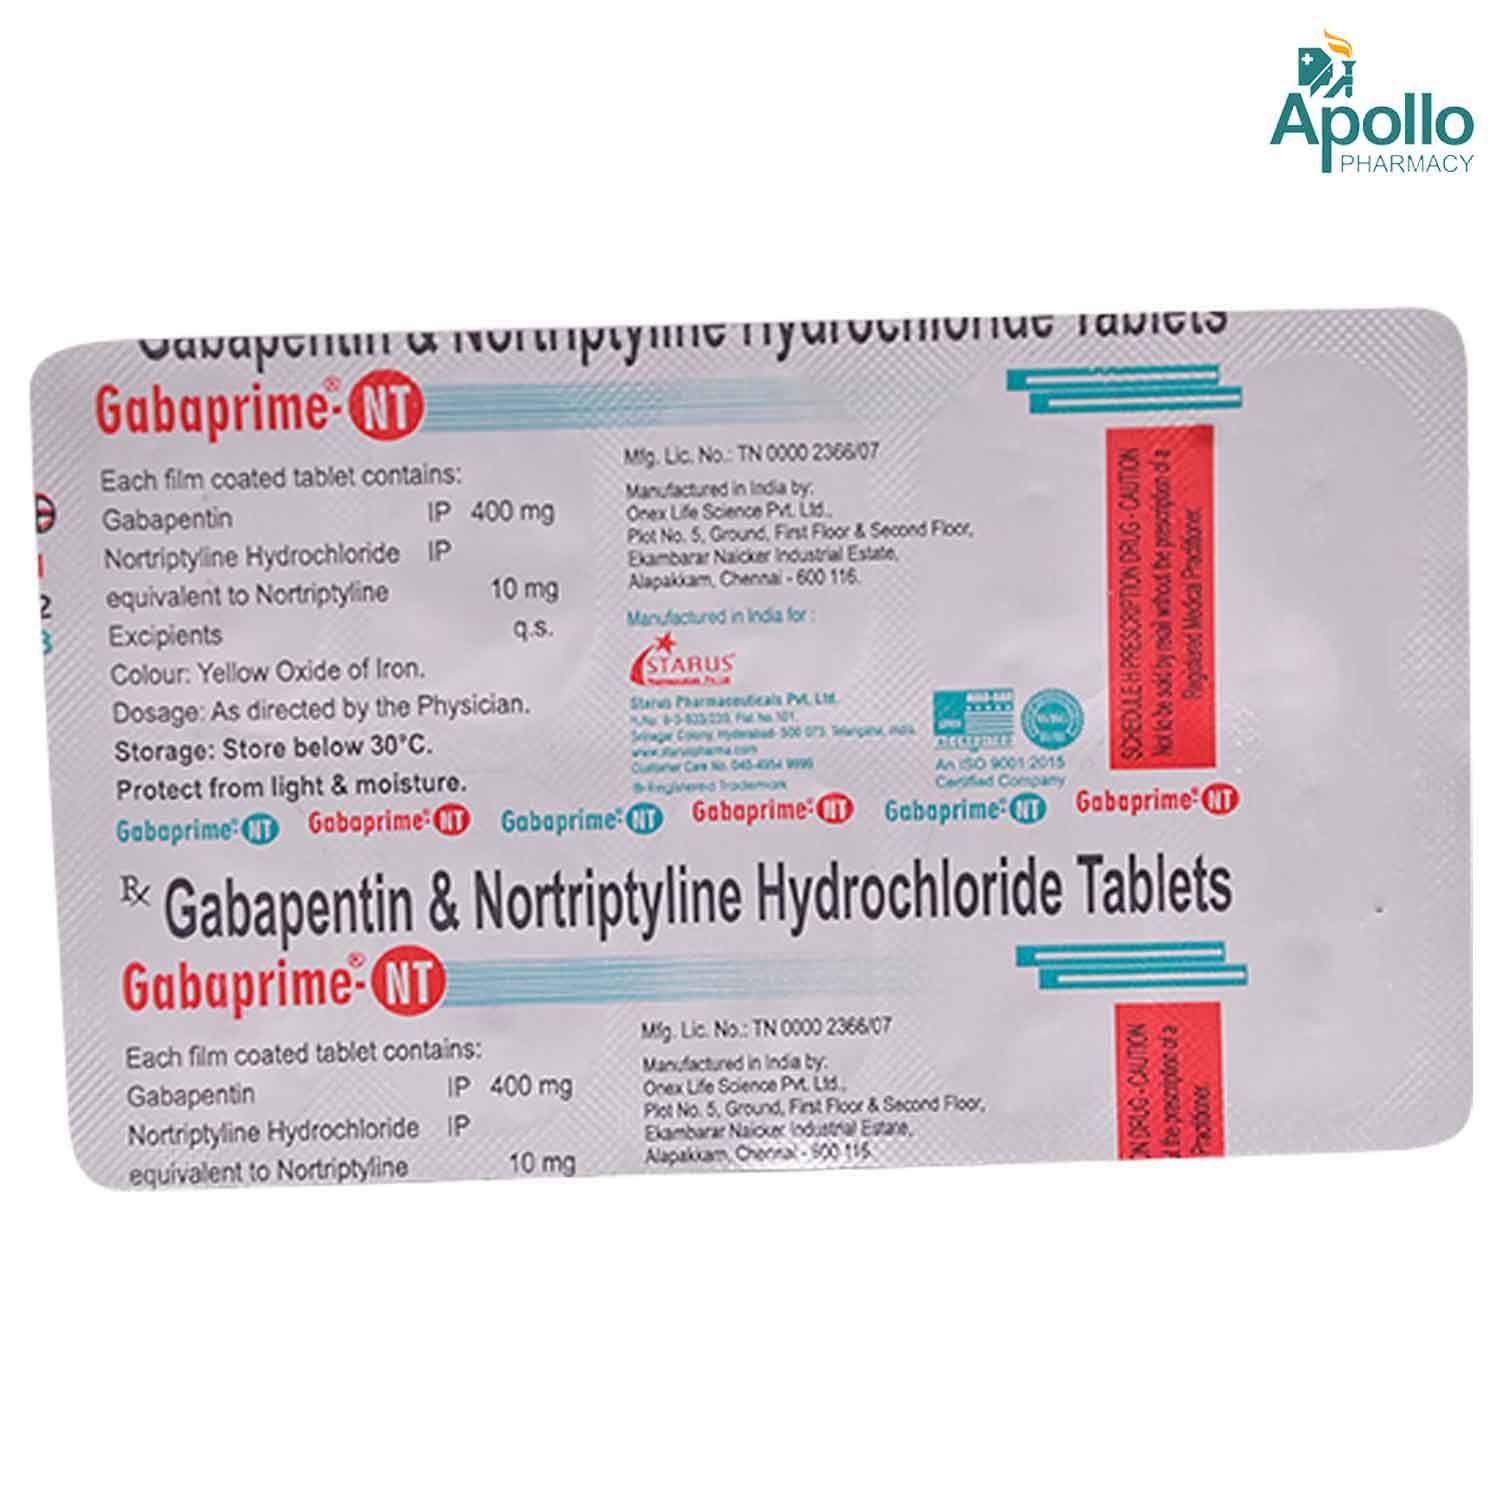 Gabaprime Nt Tablet Price Uses Side Effects Composition Apollo Pharmacy